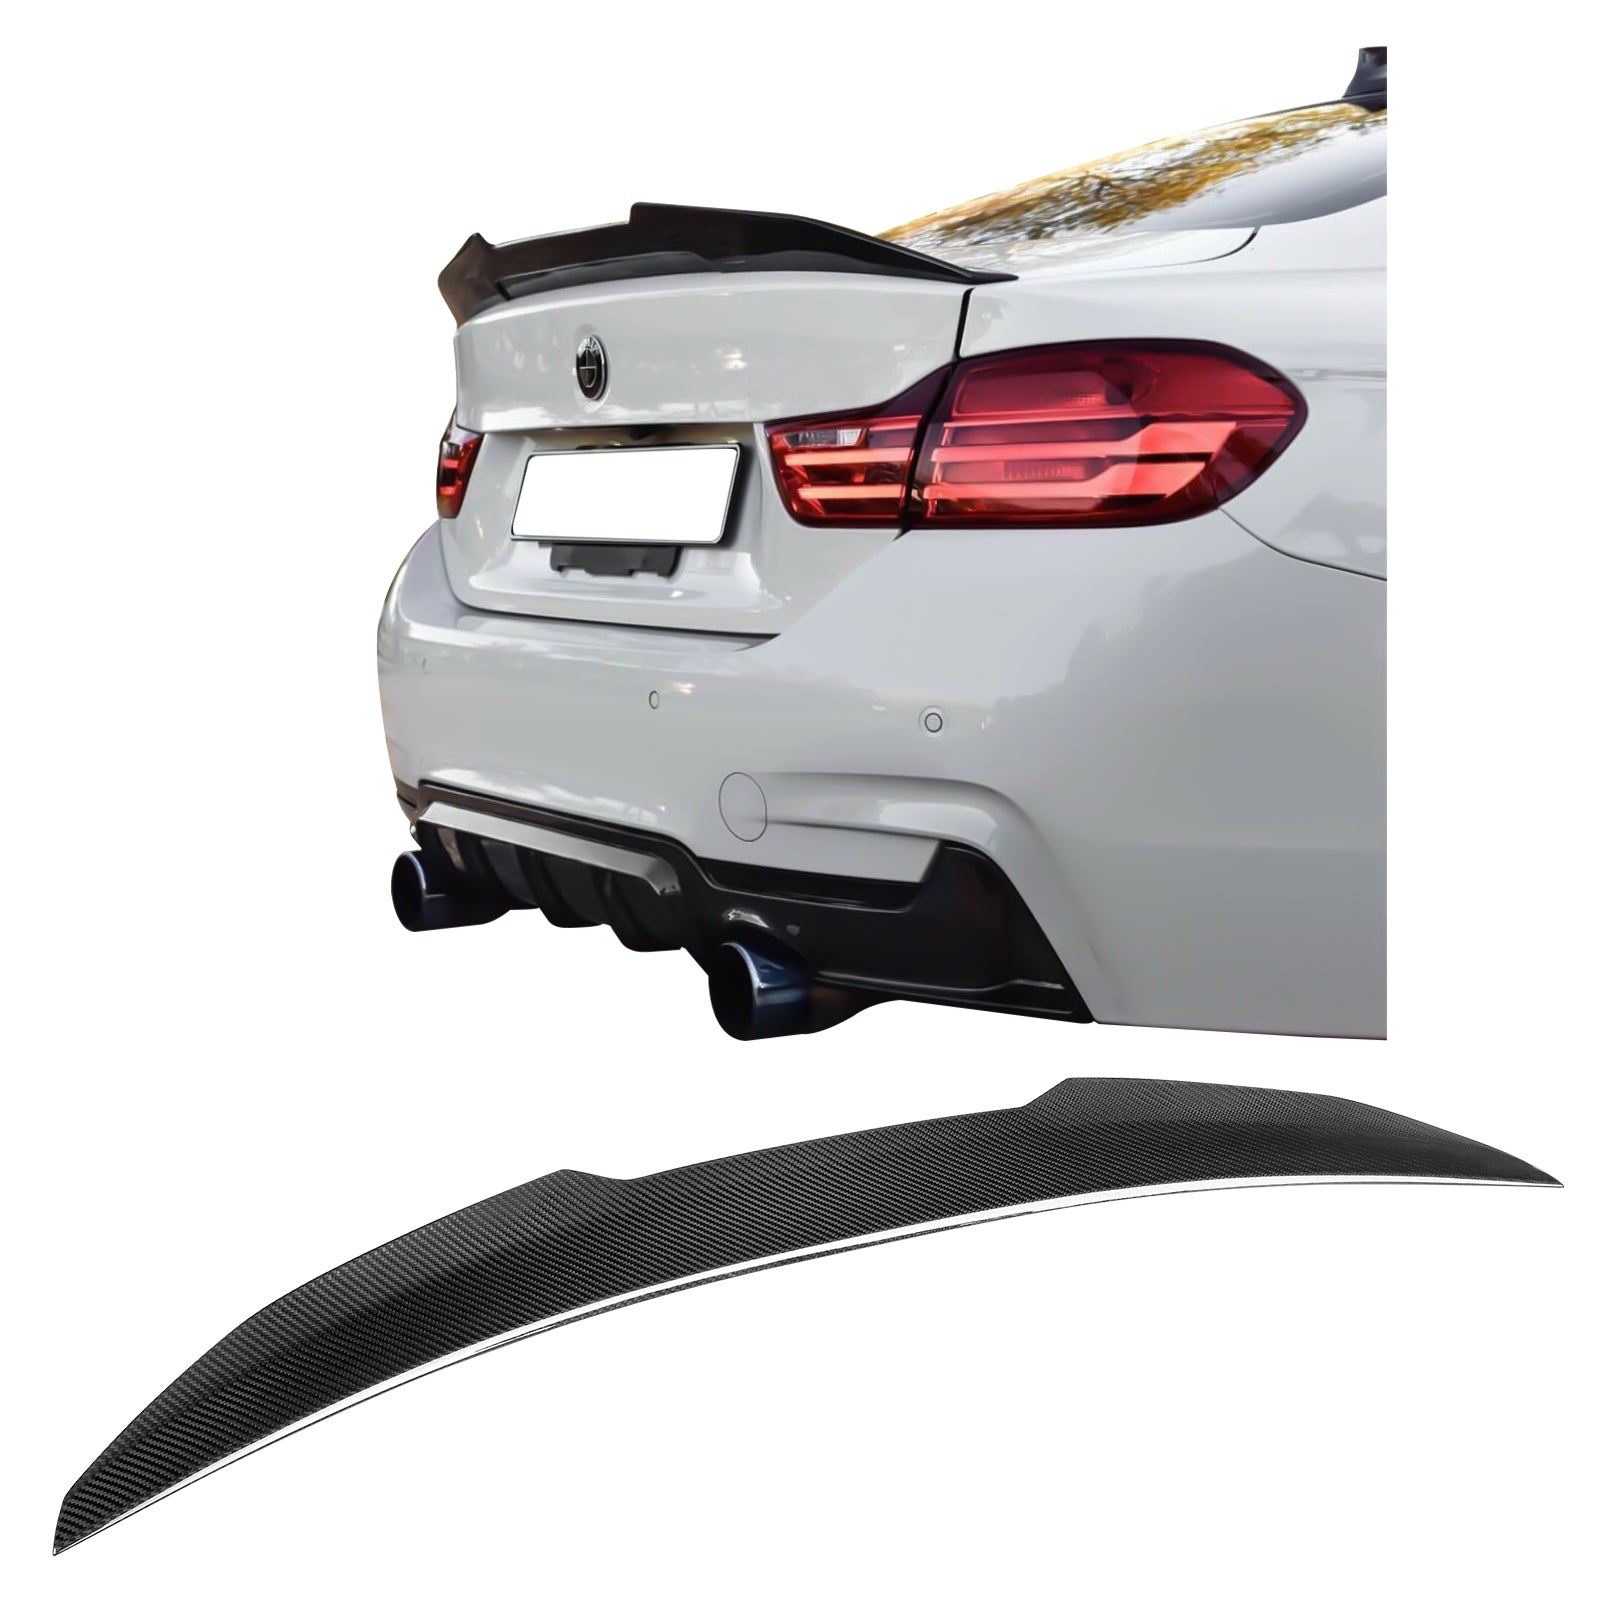 IKON MOTORSPORTS, Trunk Spoiler Compatible With 2014-2020 BMW 4-Series F32 Coupe , Matte Carbon Fiber PSM Style Rear Spoiler Wing, 2015 2016 2017 2018 2019